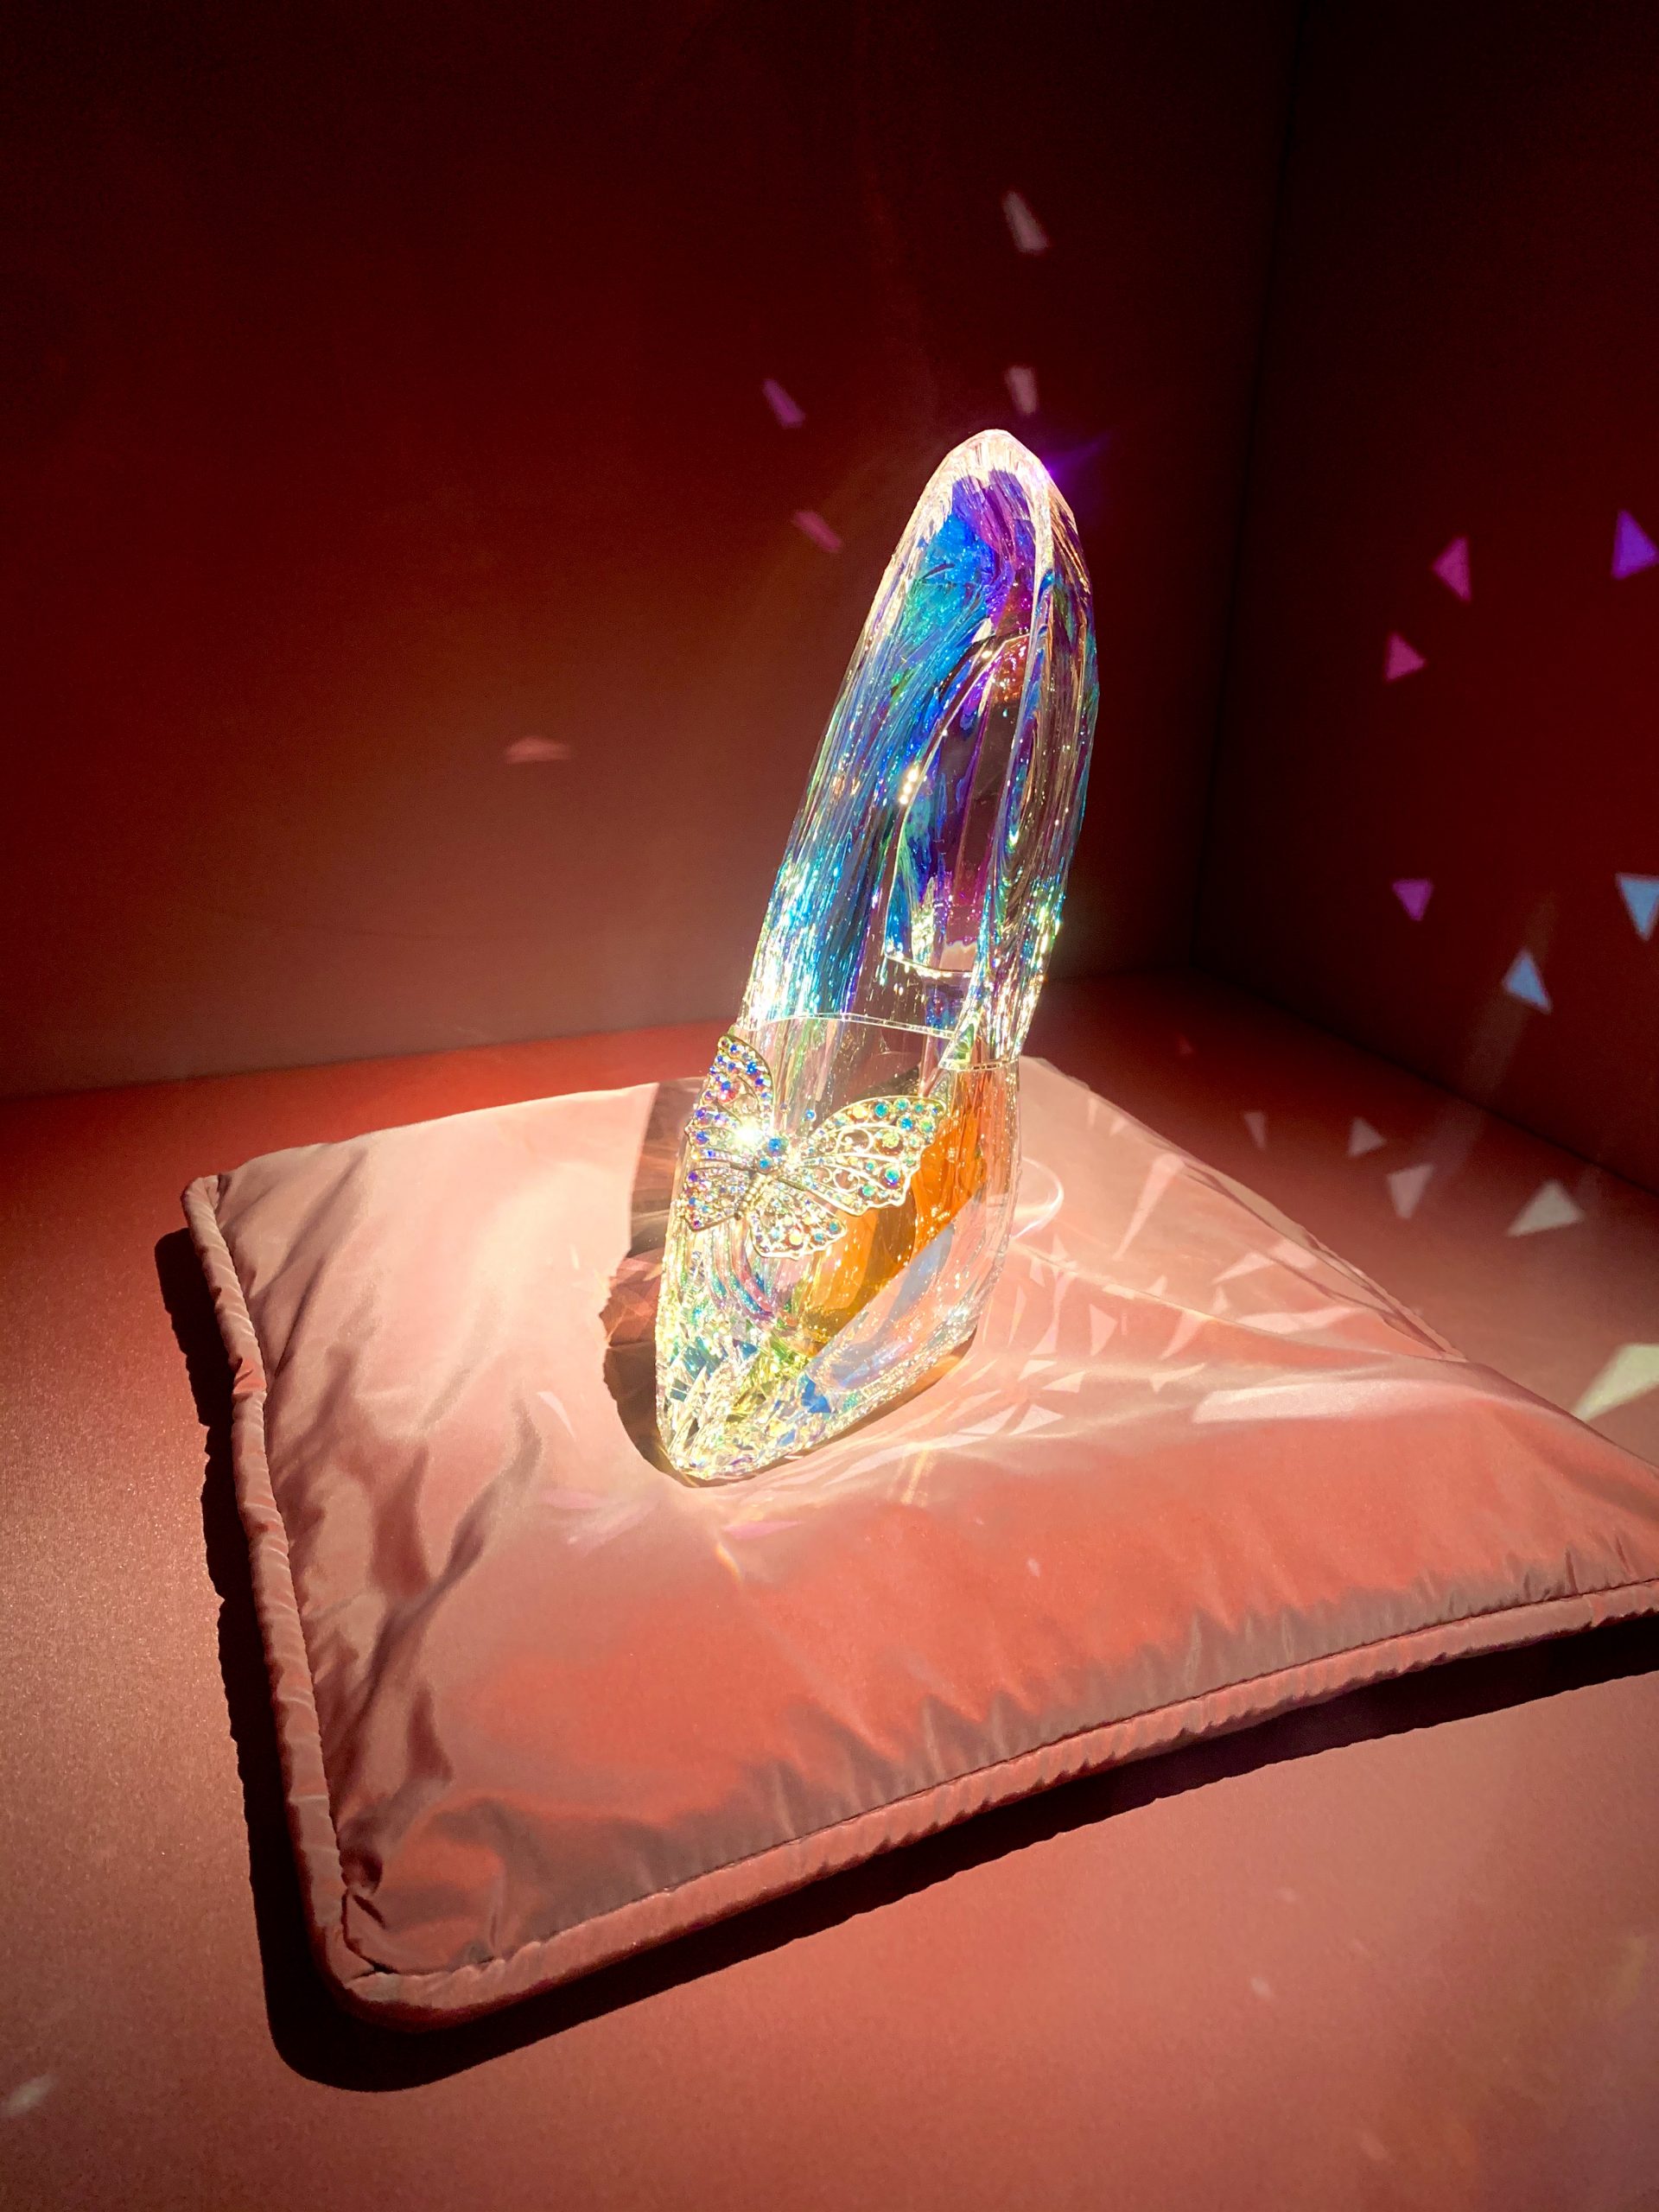 Crystal Shoe in a Pillow